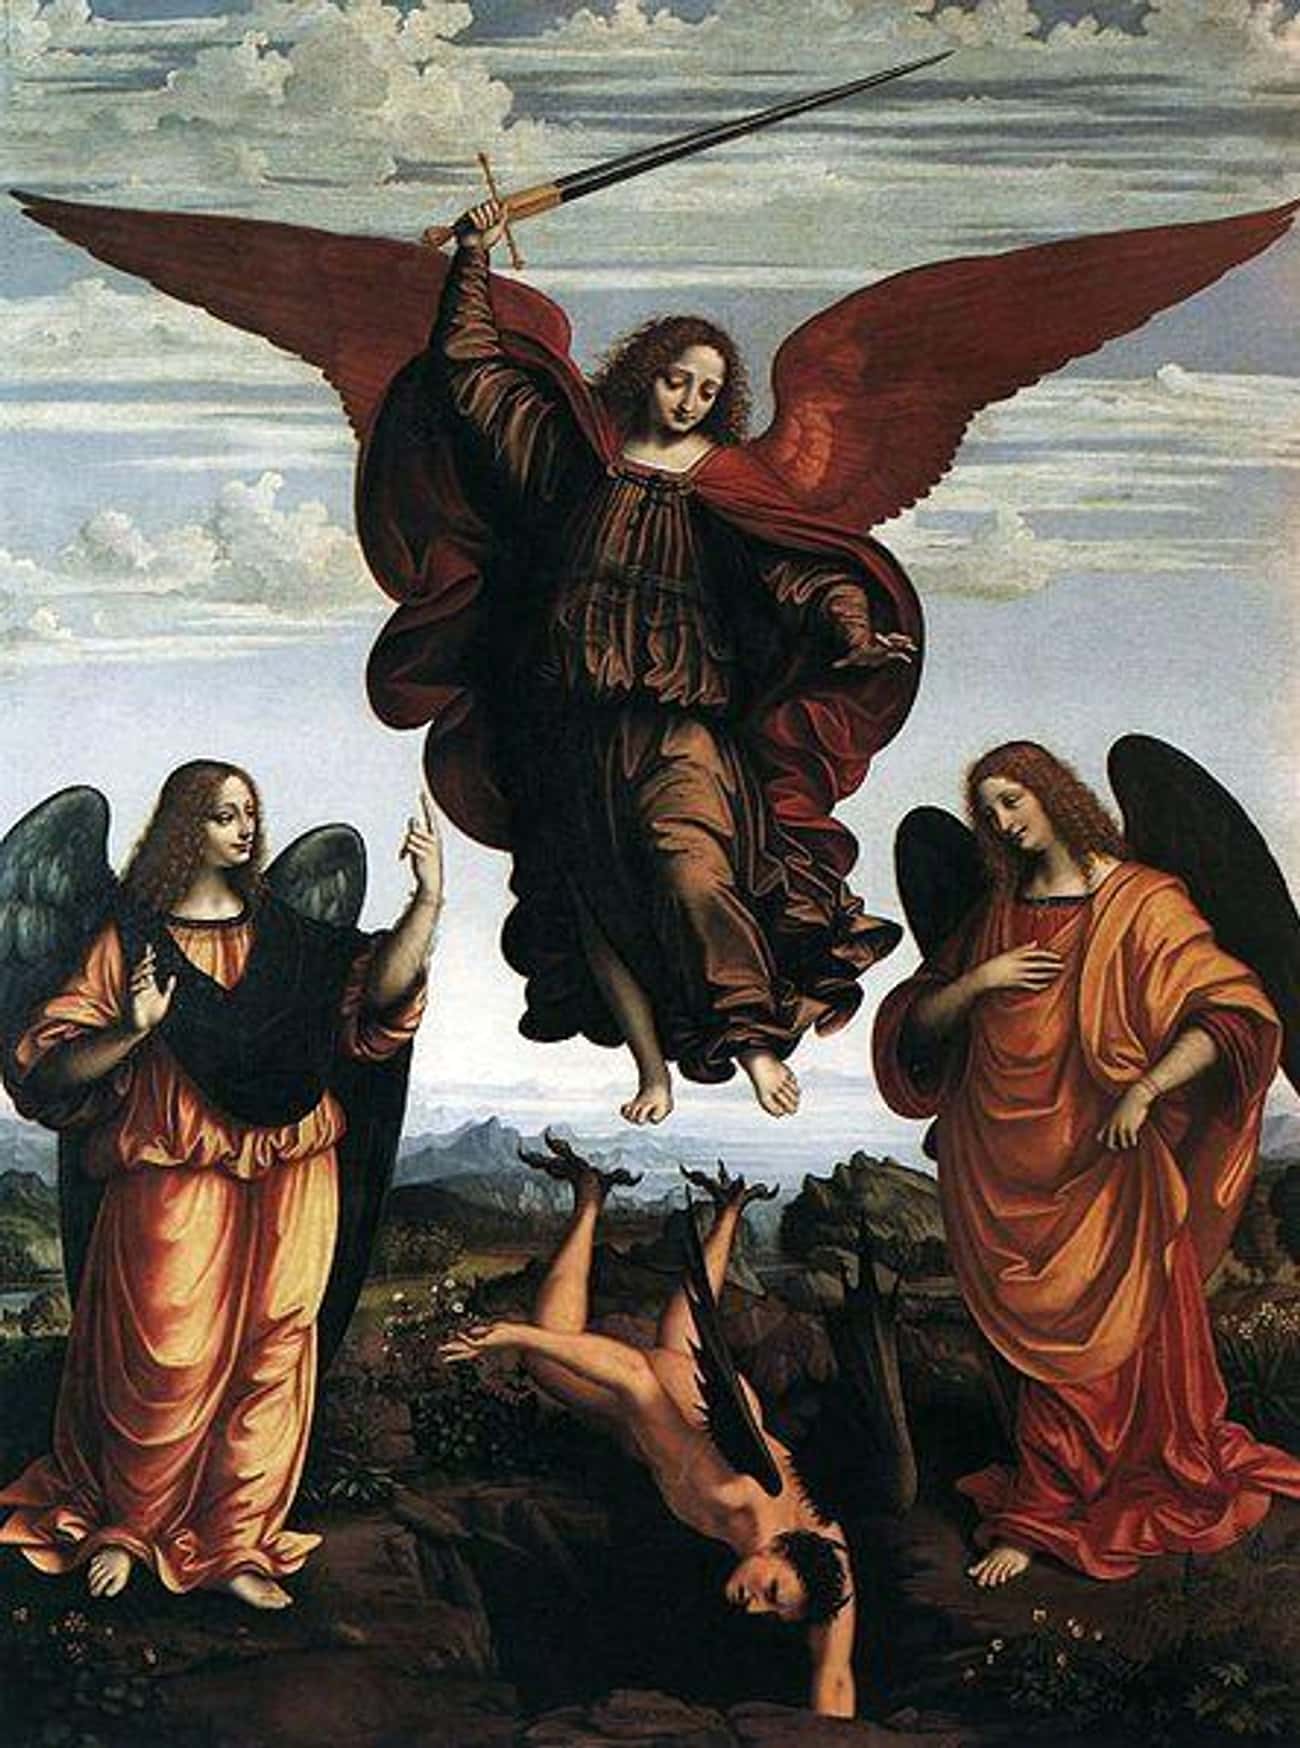 Raphael Buried A Demon Alive In The Desert